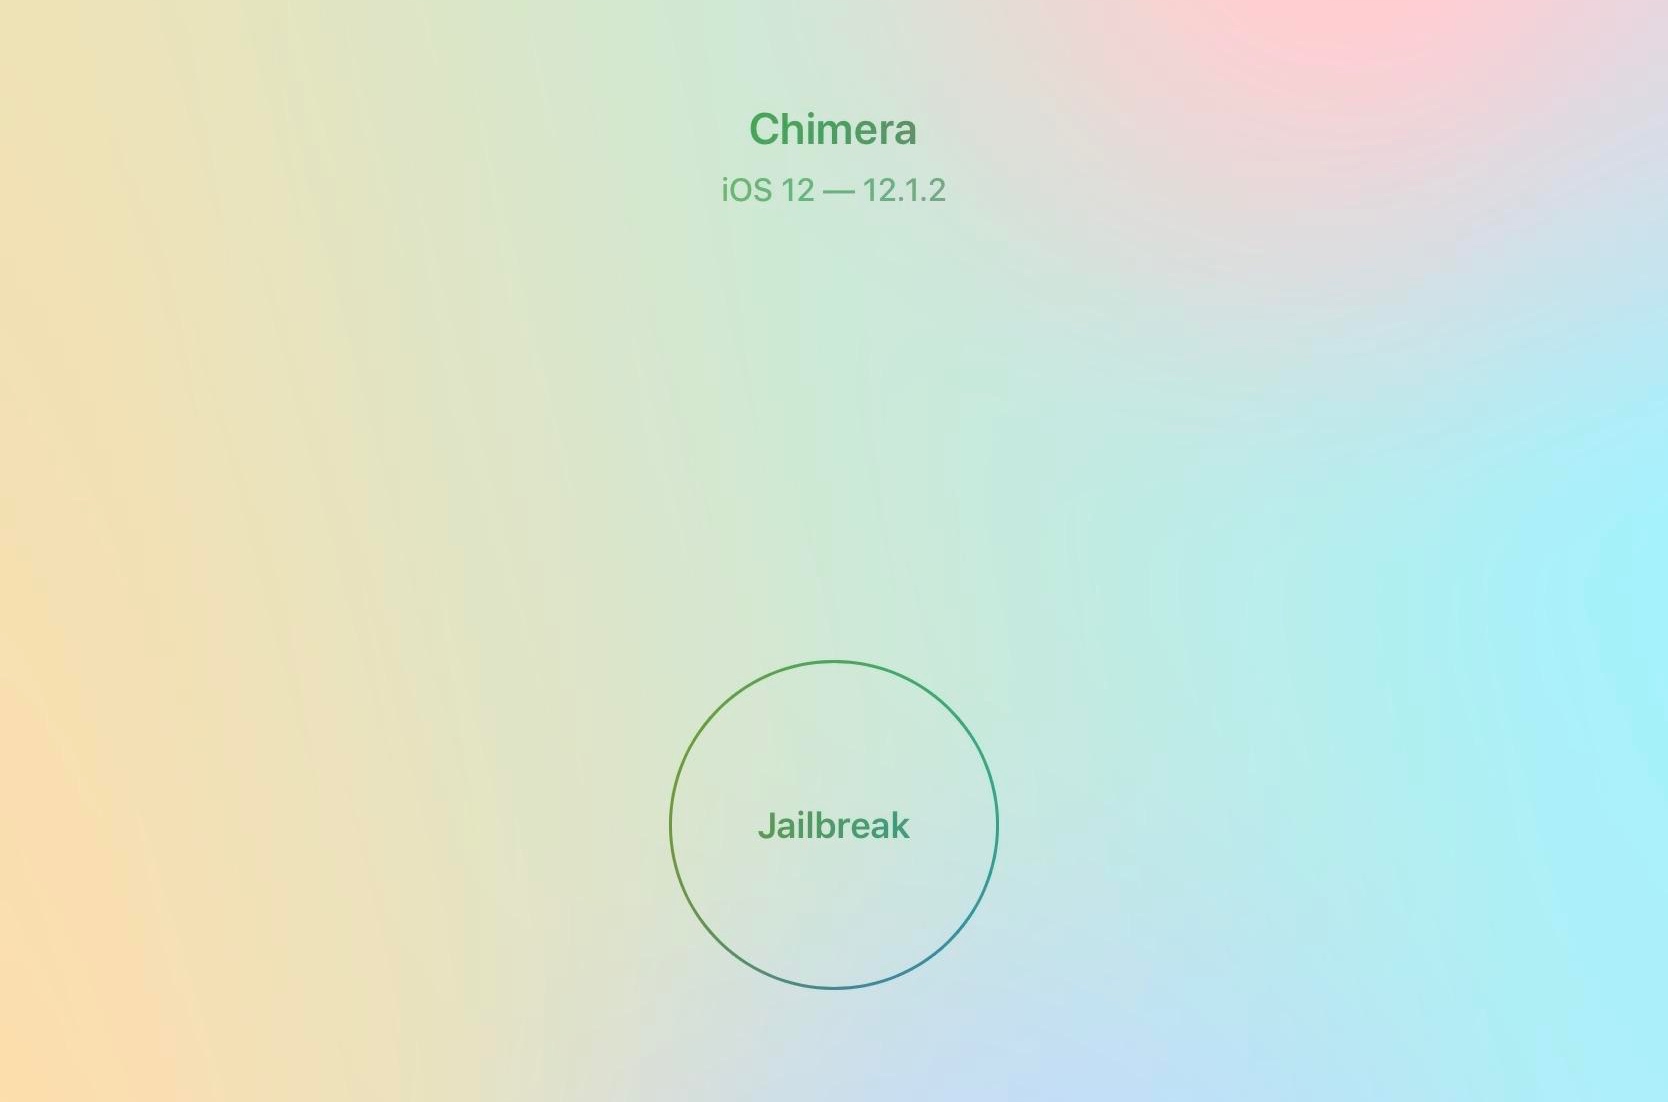 Electra Team Releases Chimera V1 0 7 With A Faster Jailbreak Process